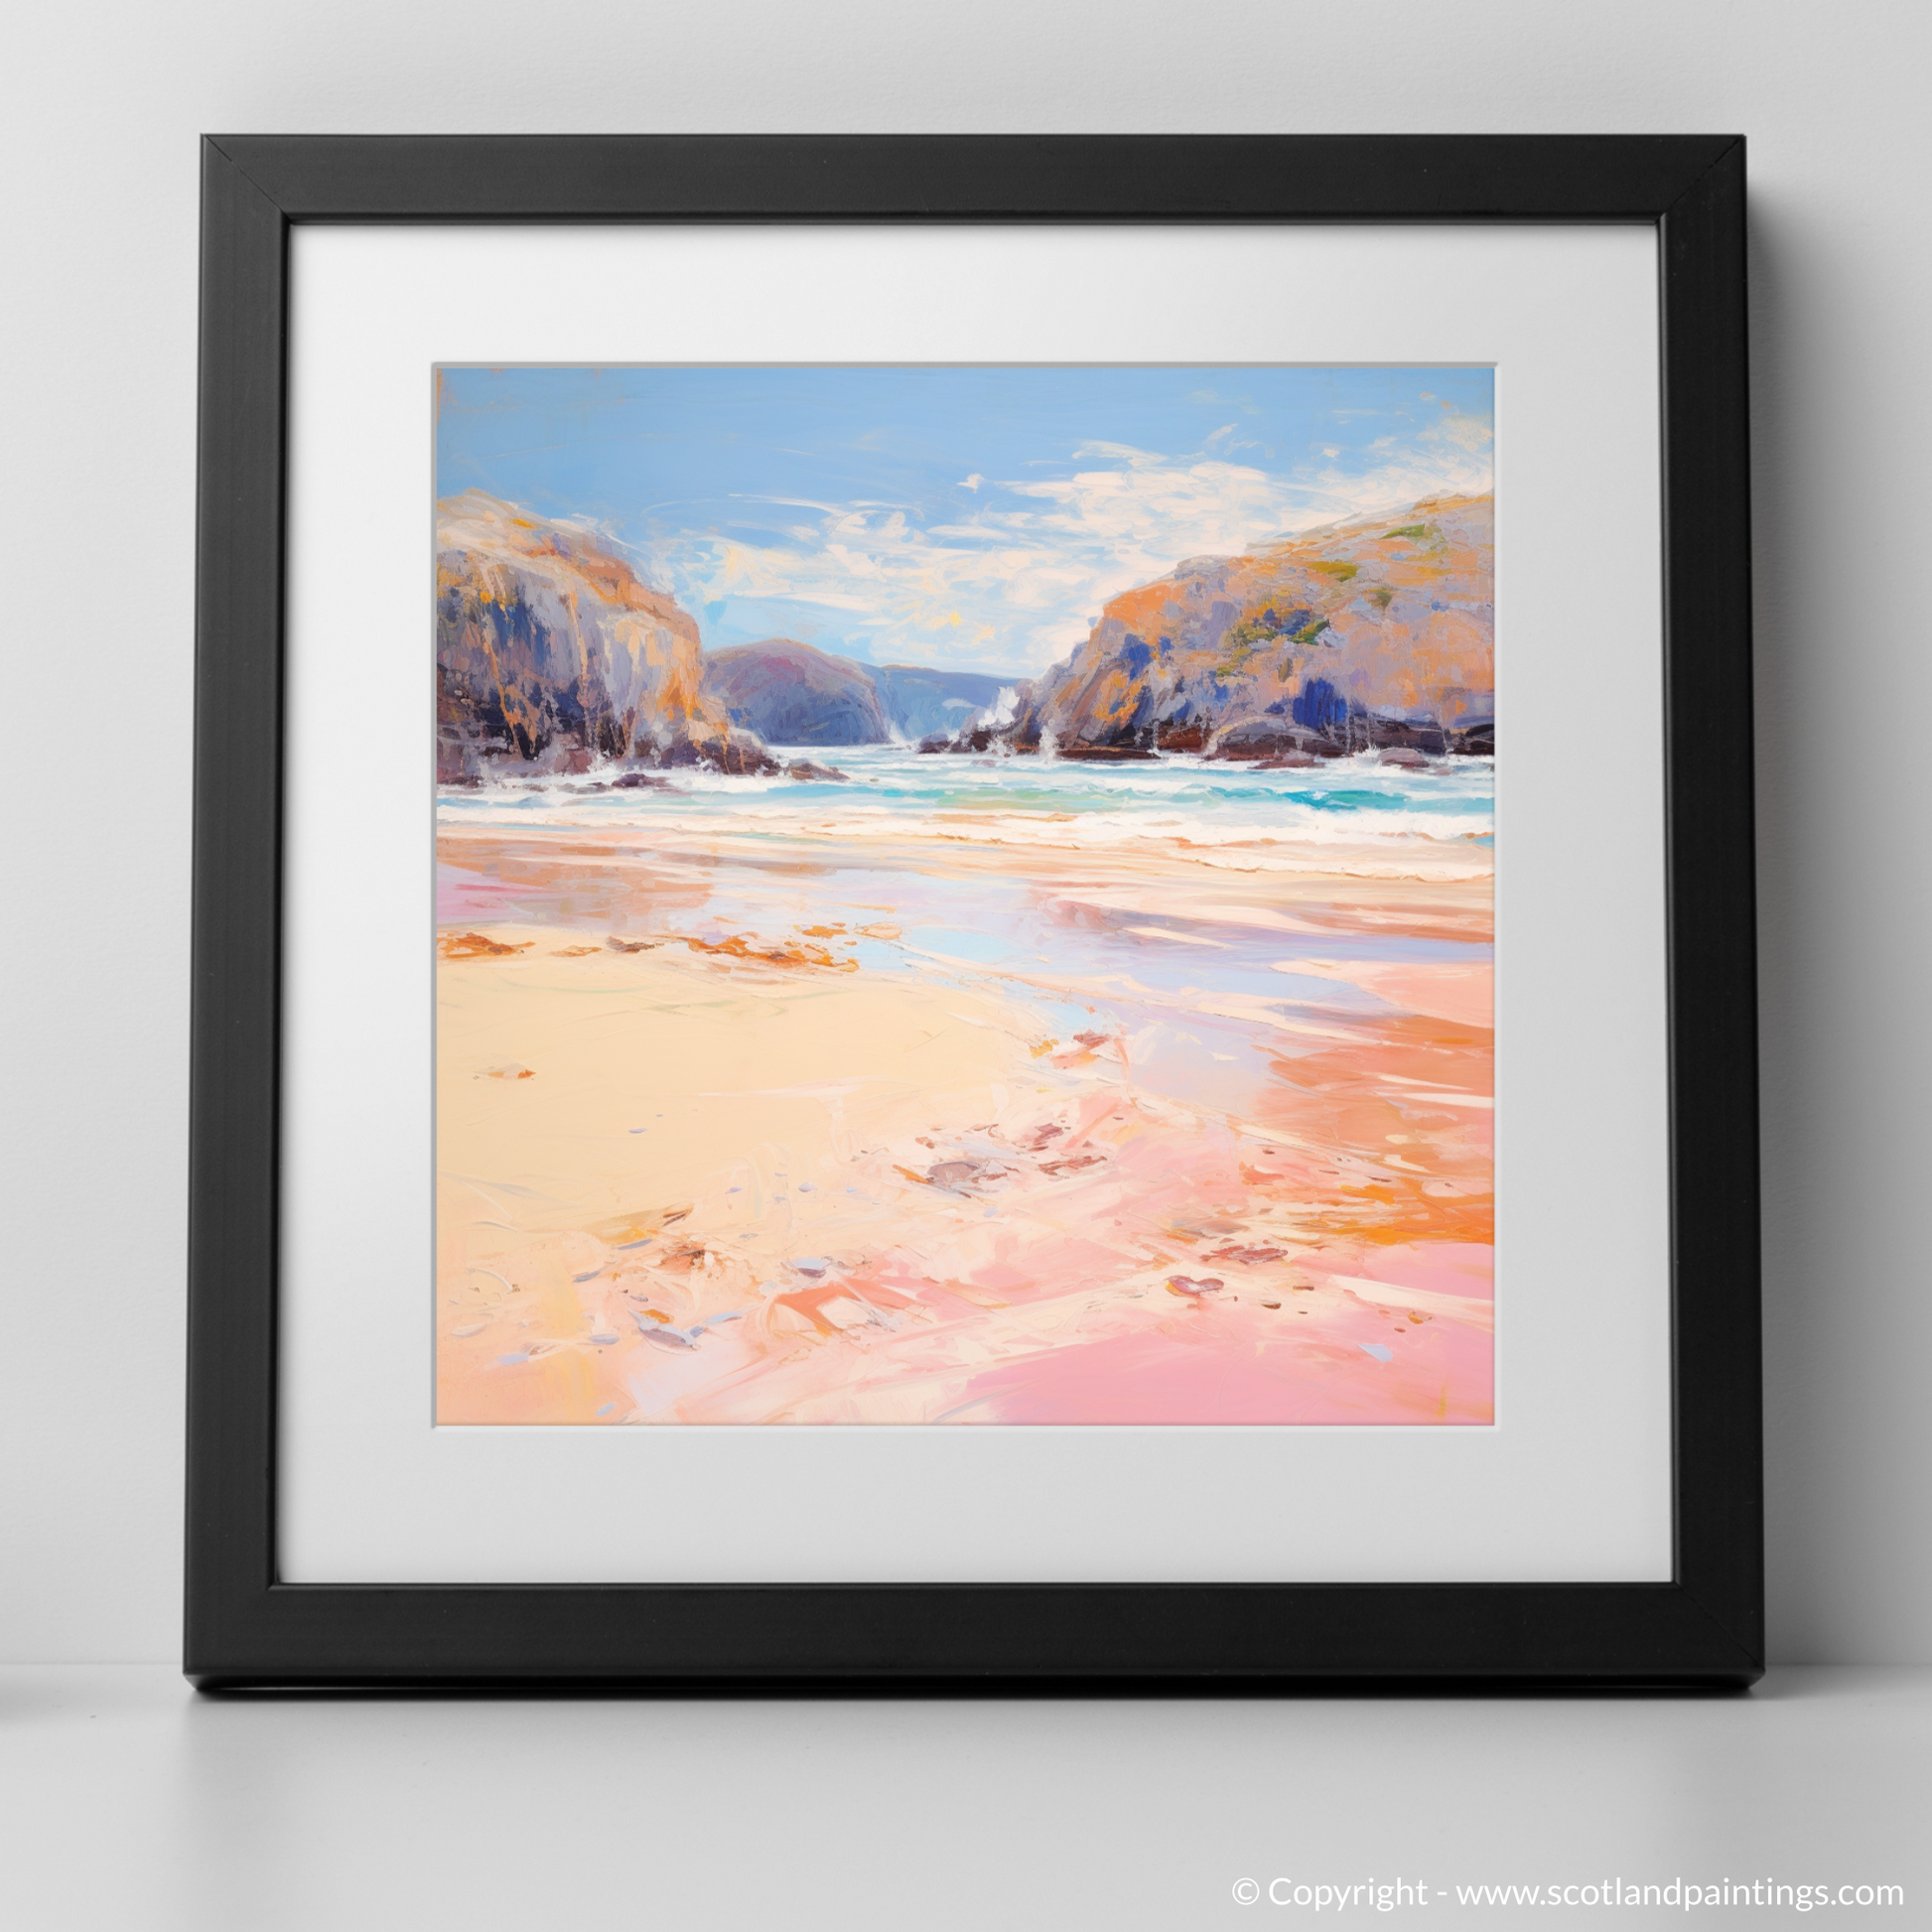 Art Print of Sandwood Bay, Sutherland in summer with a black frame